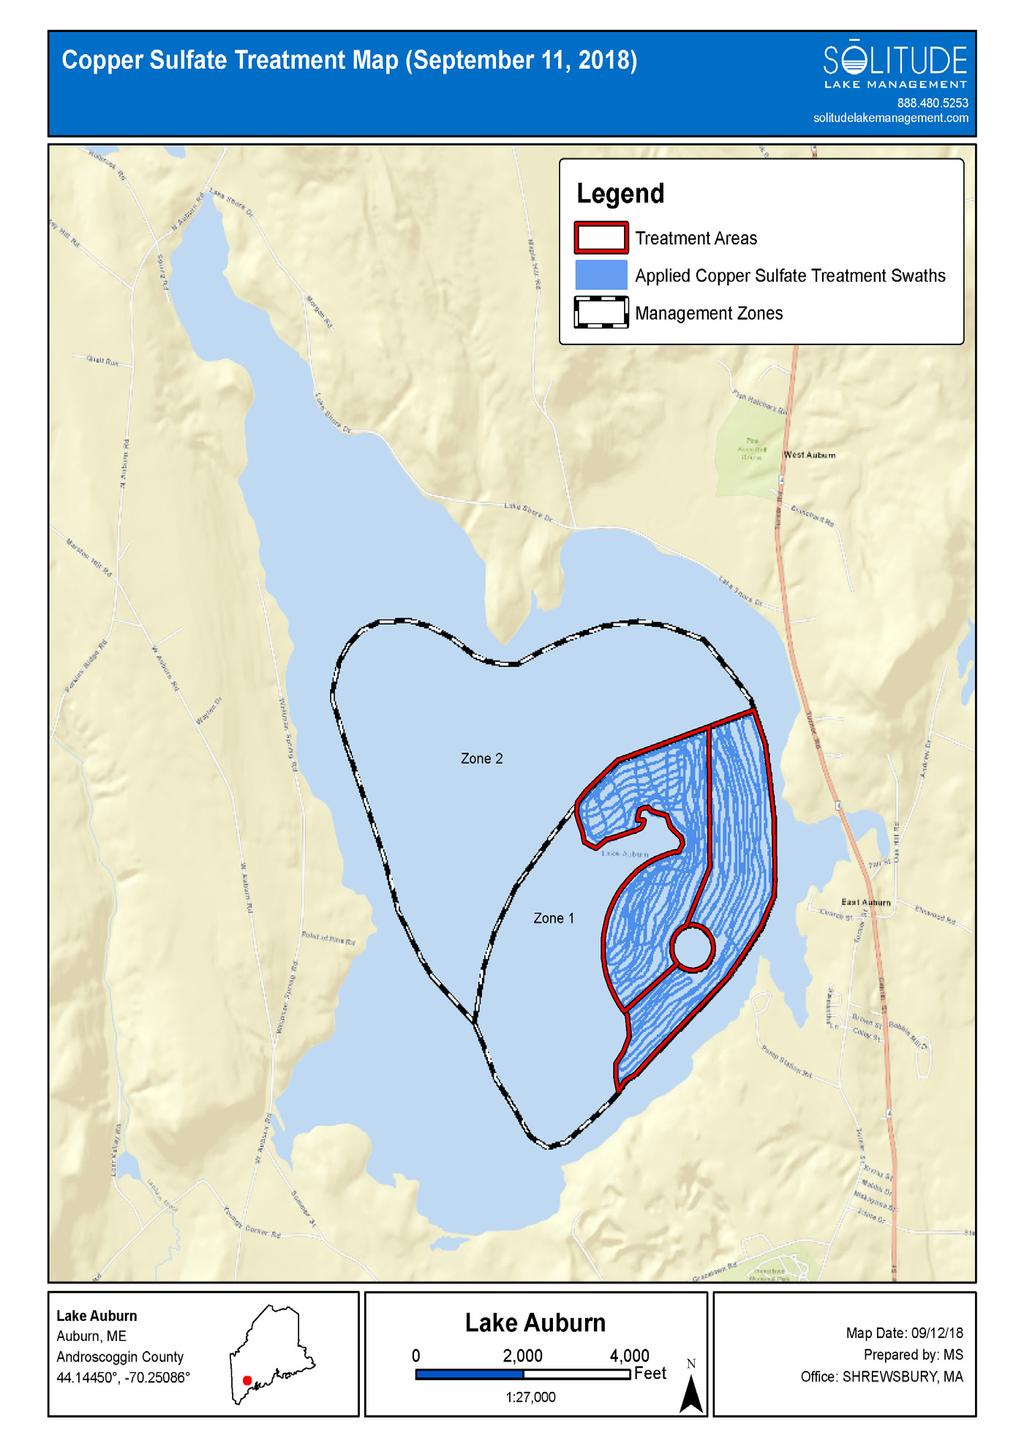 Algaecide Treatment in Lake Auburn The algaecide application was done on September 11, 2018 on 300 acres around the intake pipe on the eastern side of Lake Auburn.